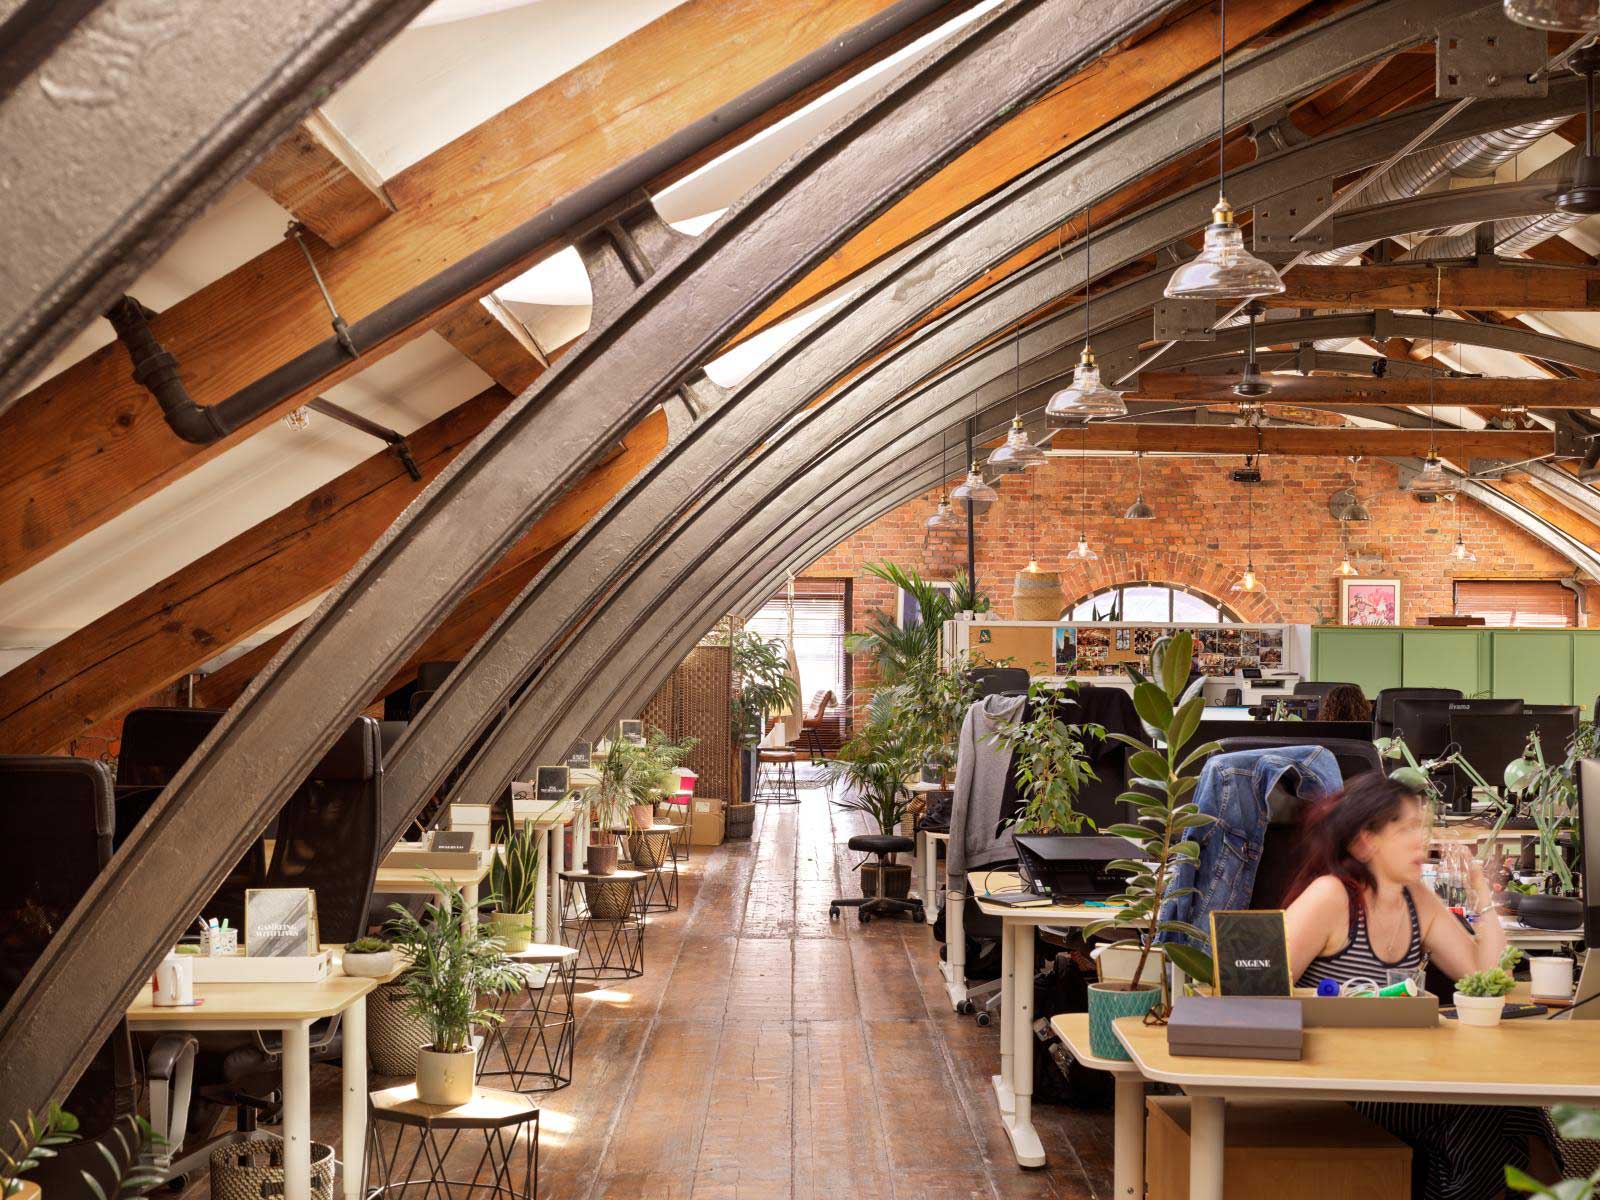 A view of an office within a historic mill building featuring arches of exposed girders.